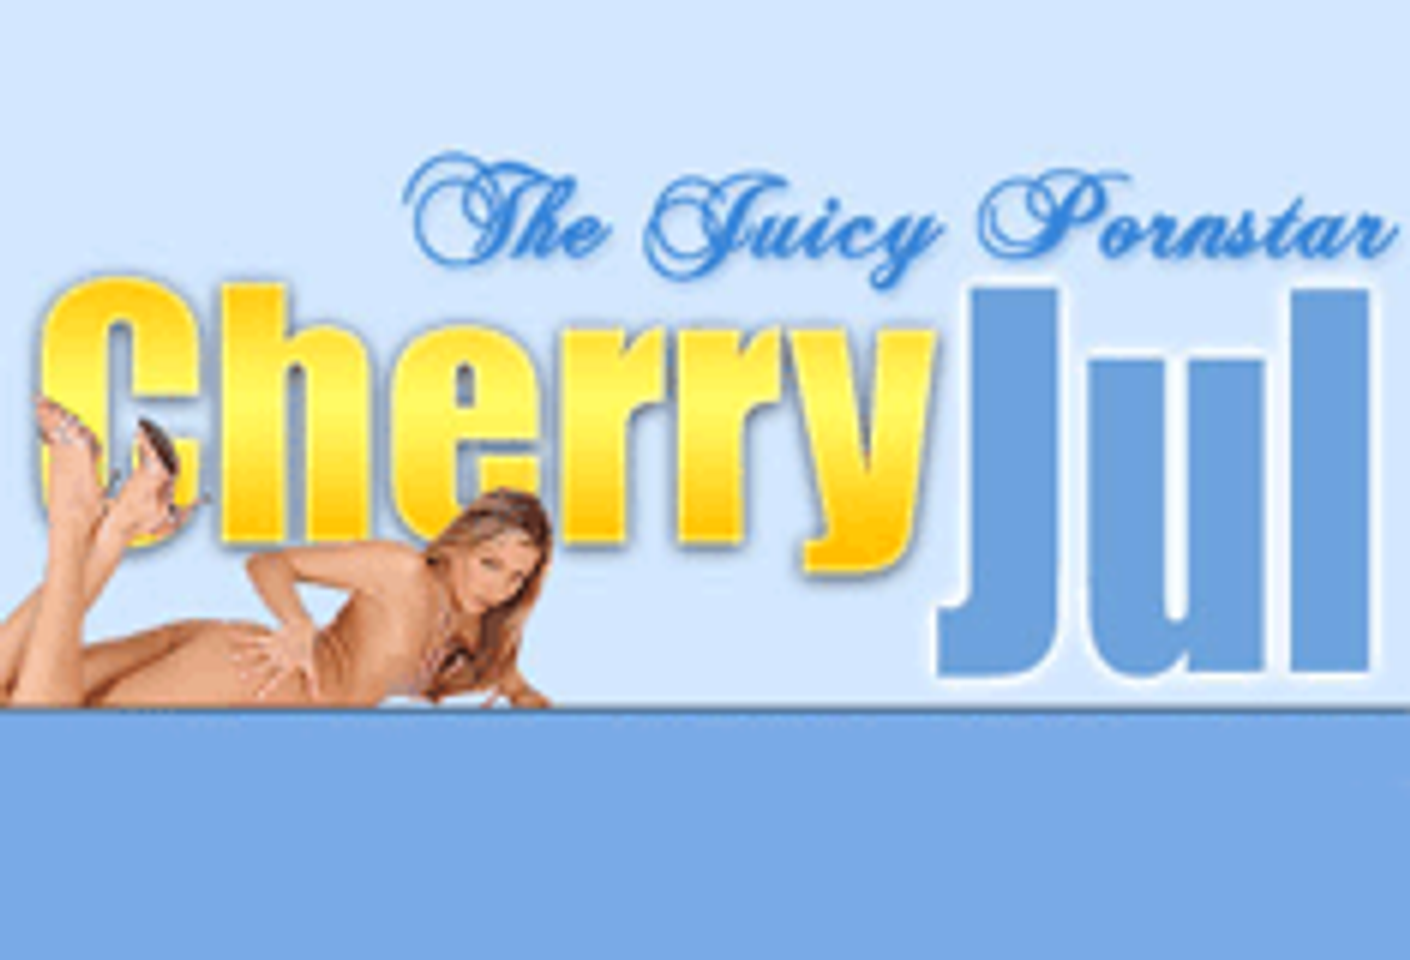 DeFrancesco Launches Site for Performer Cherry Jul